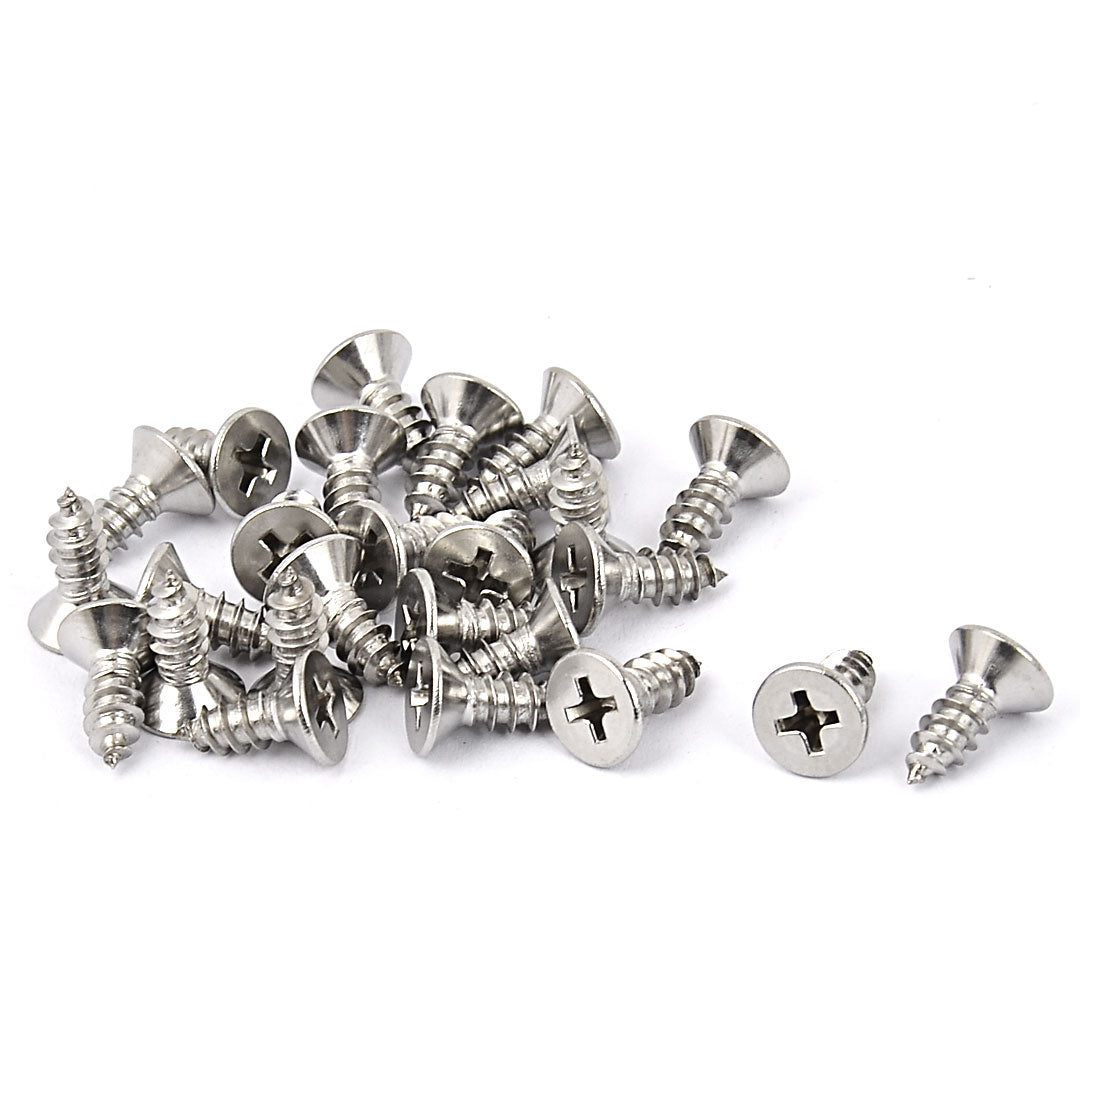 Uxcell Uxcell M4.8 x 13mm Cross Head Countersunk Self Tapping Screw Fasteners 25 Pcs